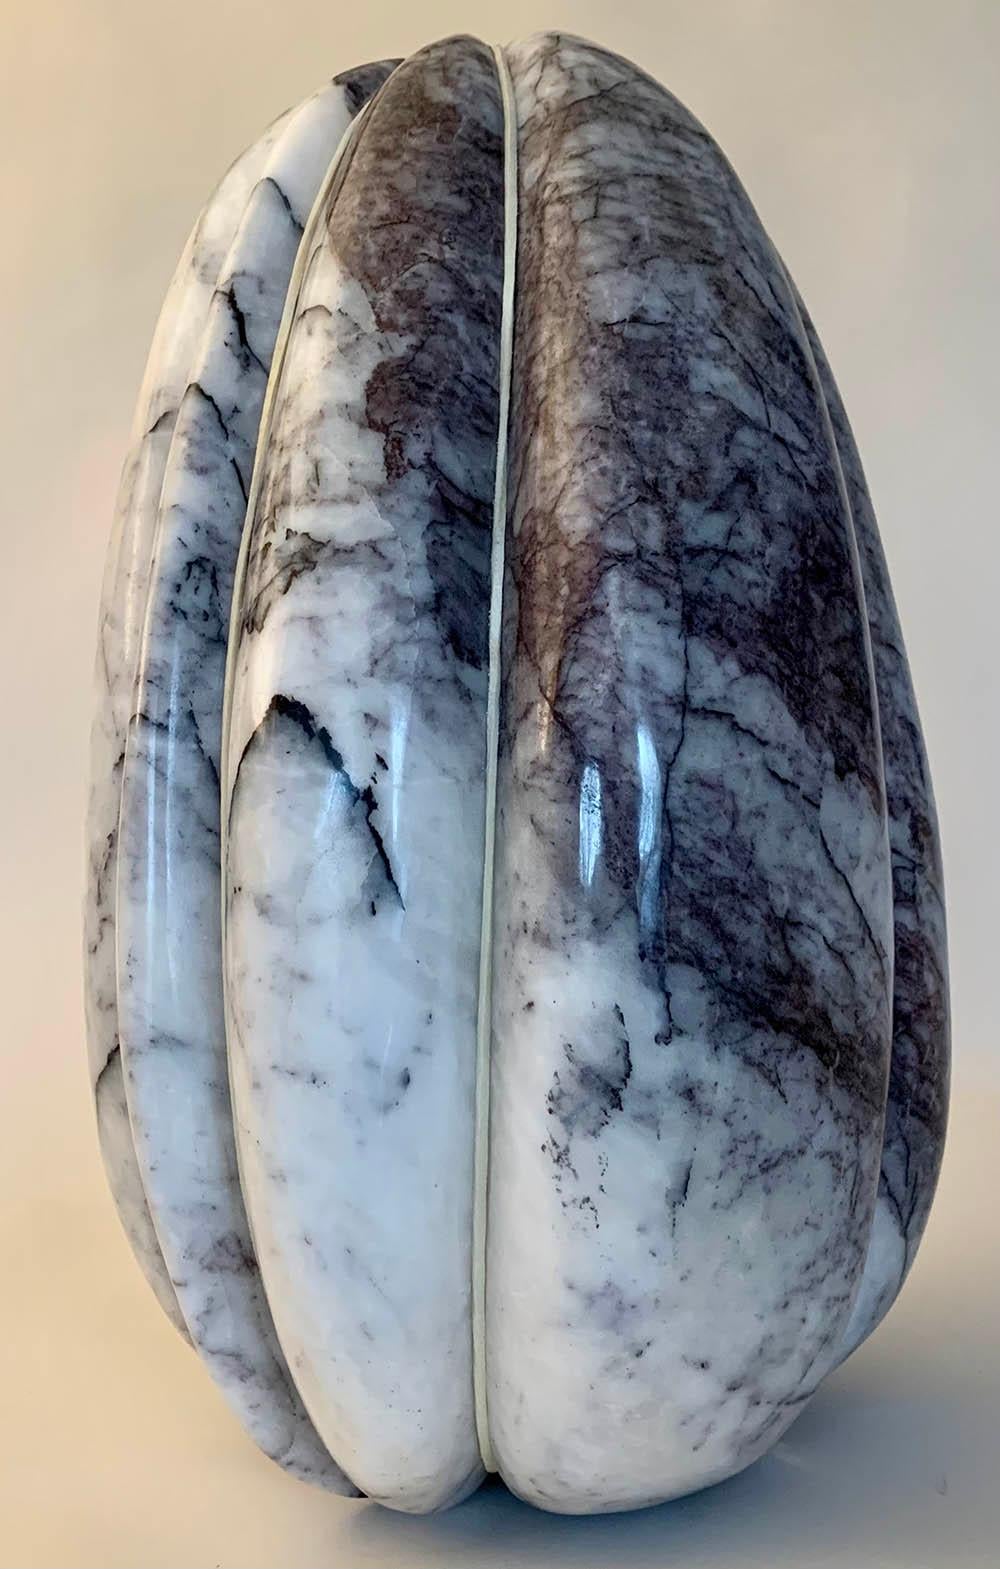 Abstract Thought by Peter Brooke-Ball - Marble Sculpture, abstract, organic 3